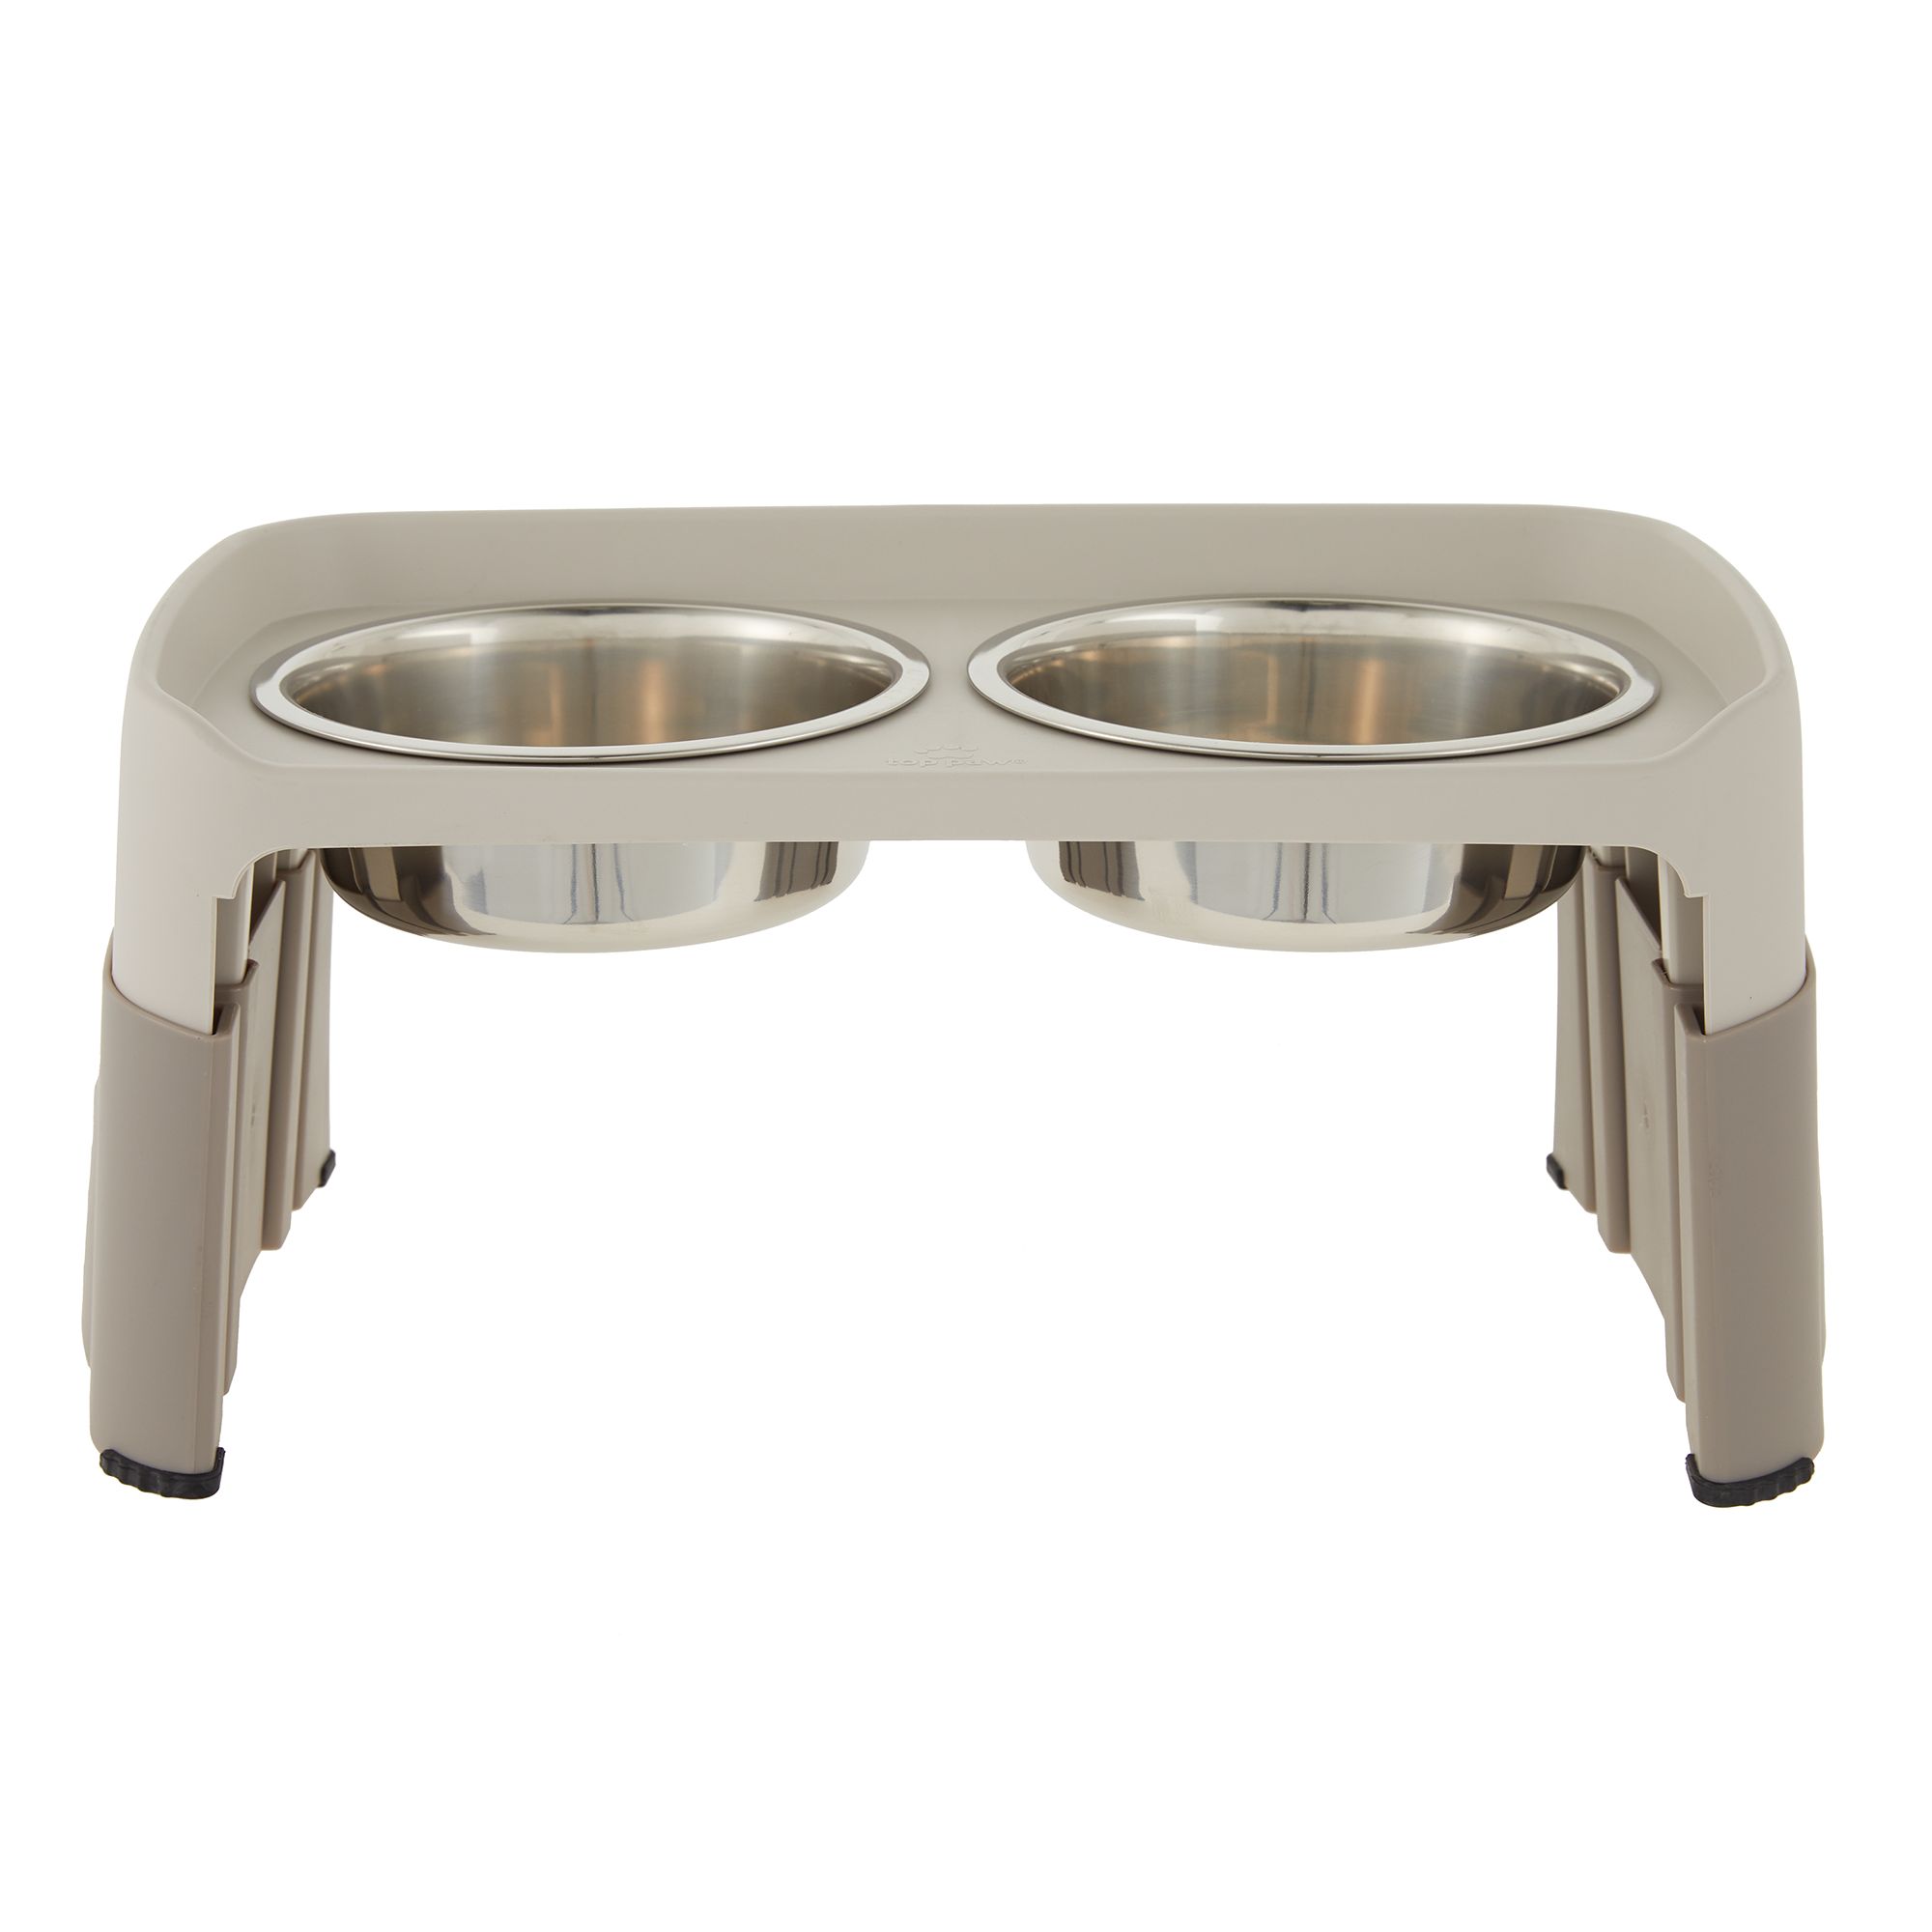 10 Messy Mutts Elevated Double Dog Feeder with Removable Stainless Steel Bowls 5 5 Cups per Bowl Adjustable Leg Sets 3 40 oz